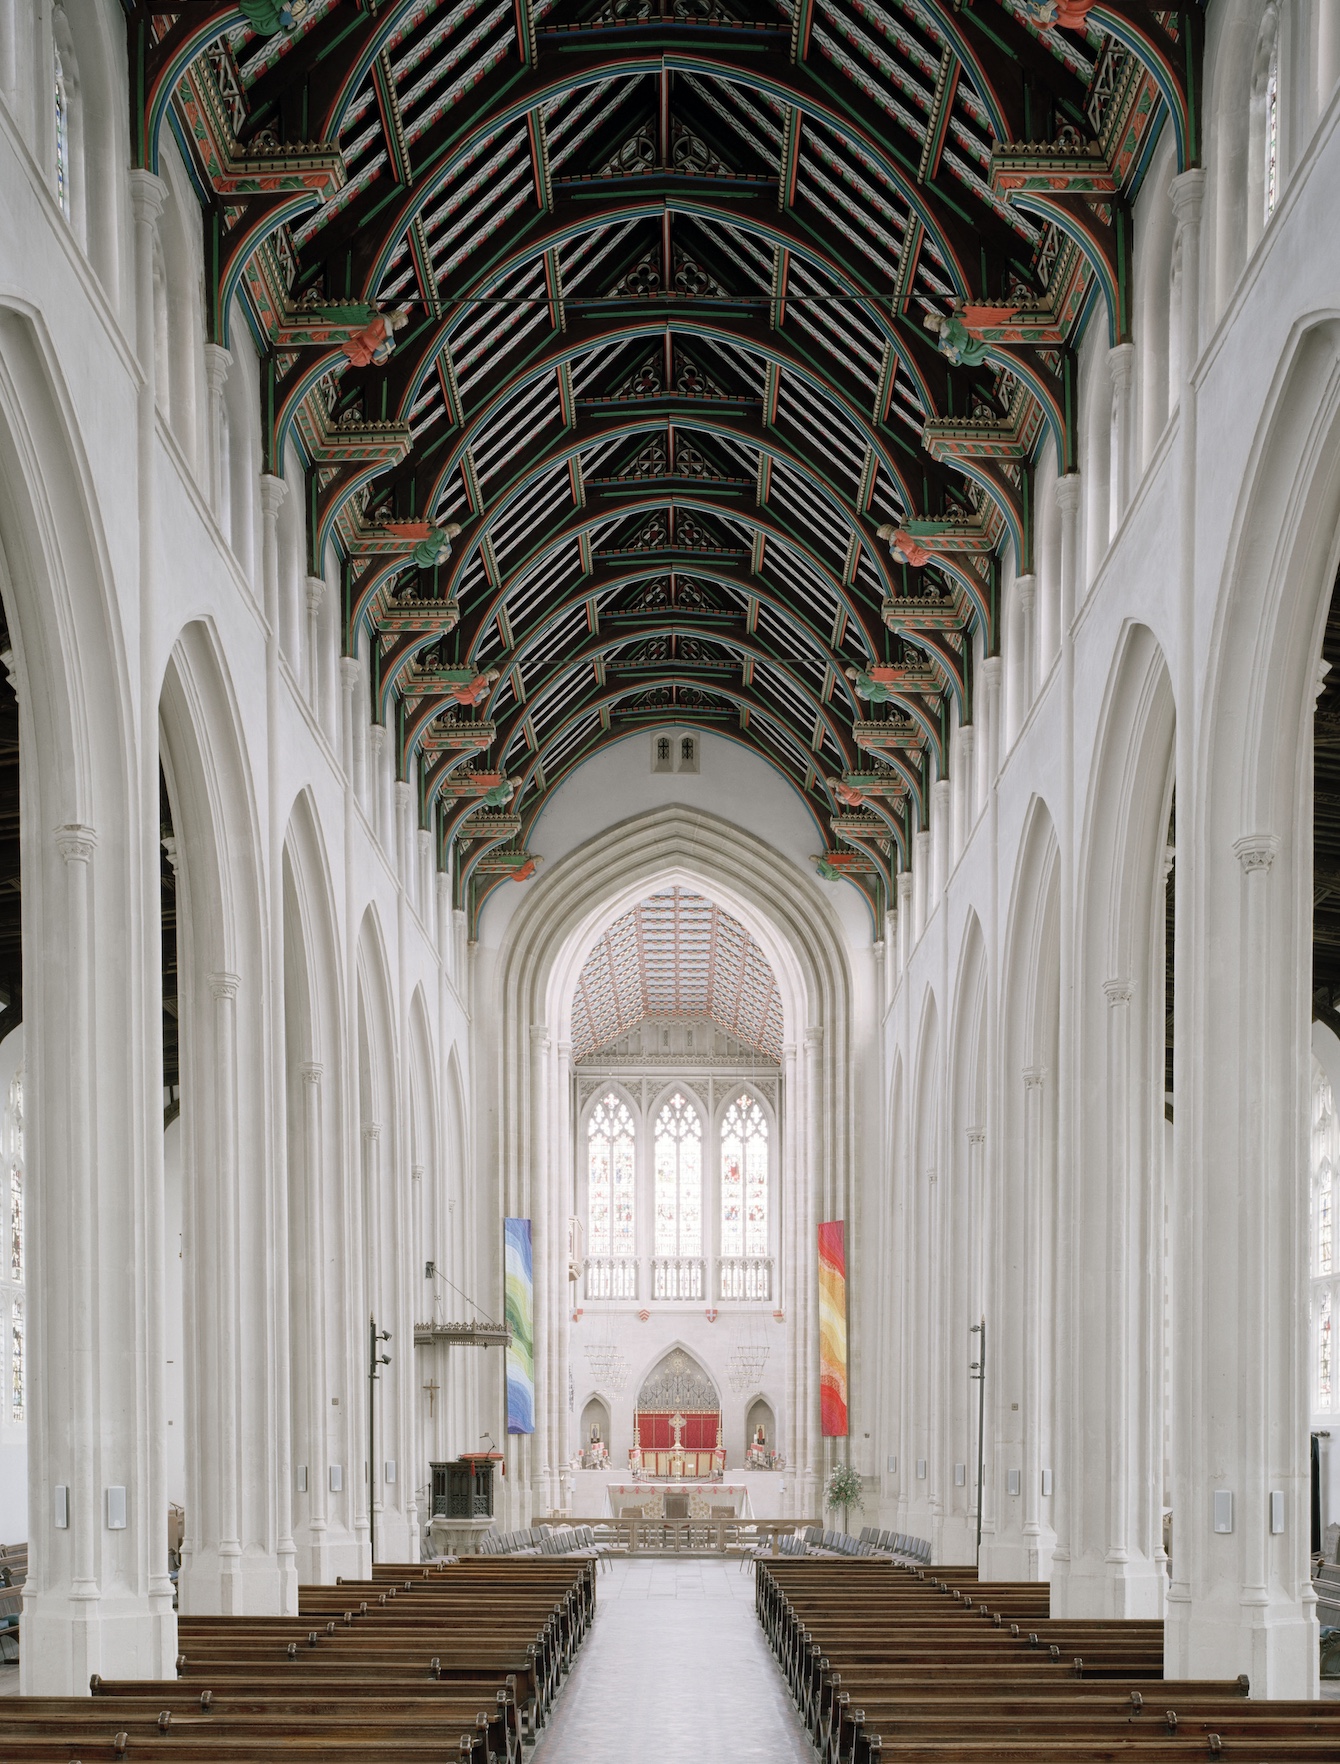 Peter Marlow’s The English Cathedral - St Edmundsbury